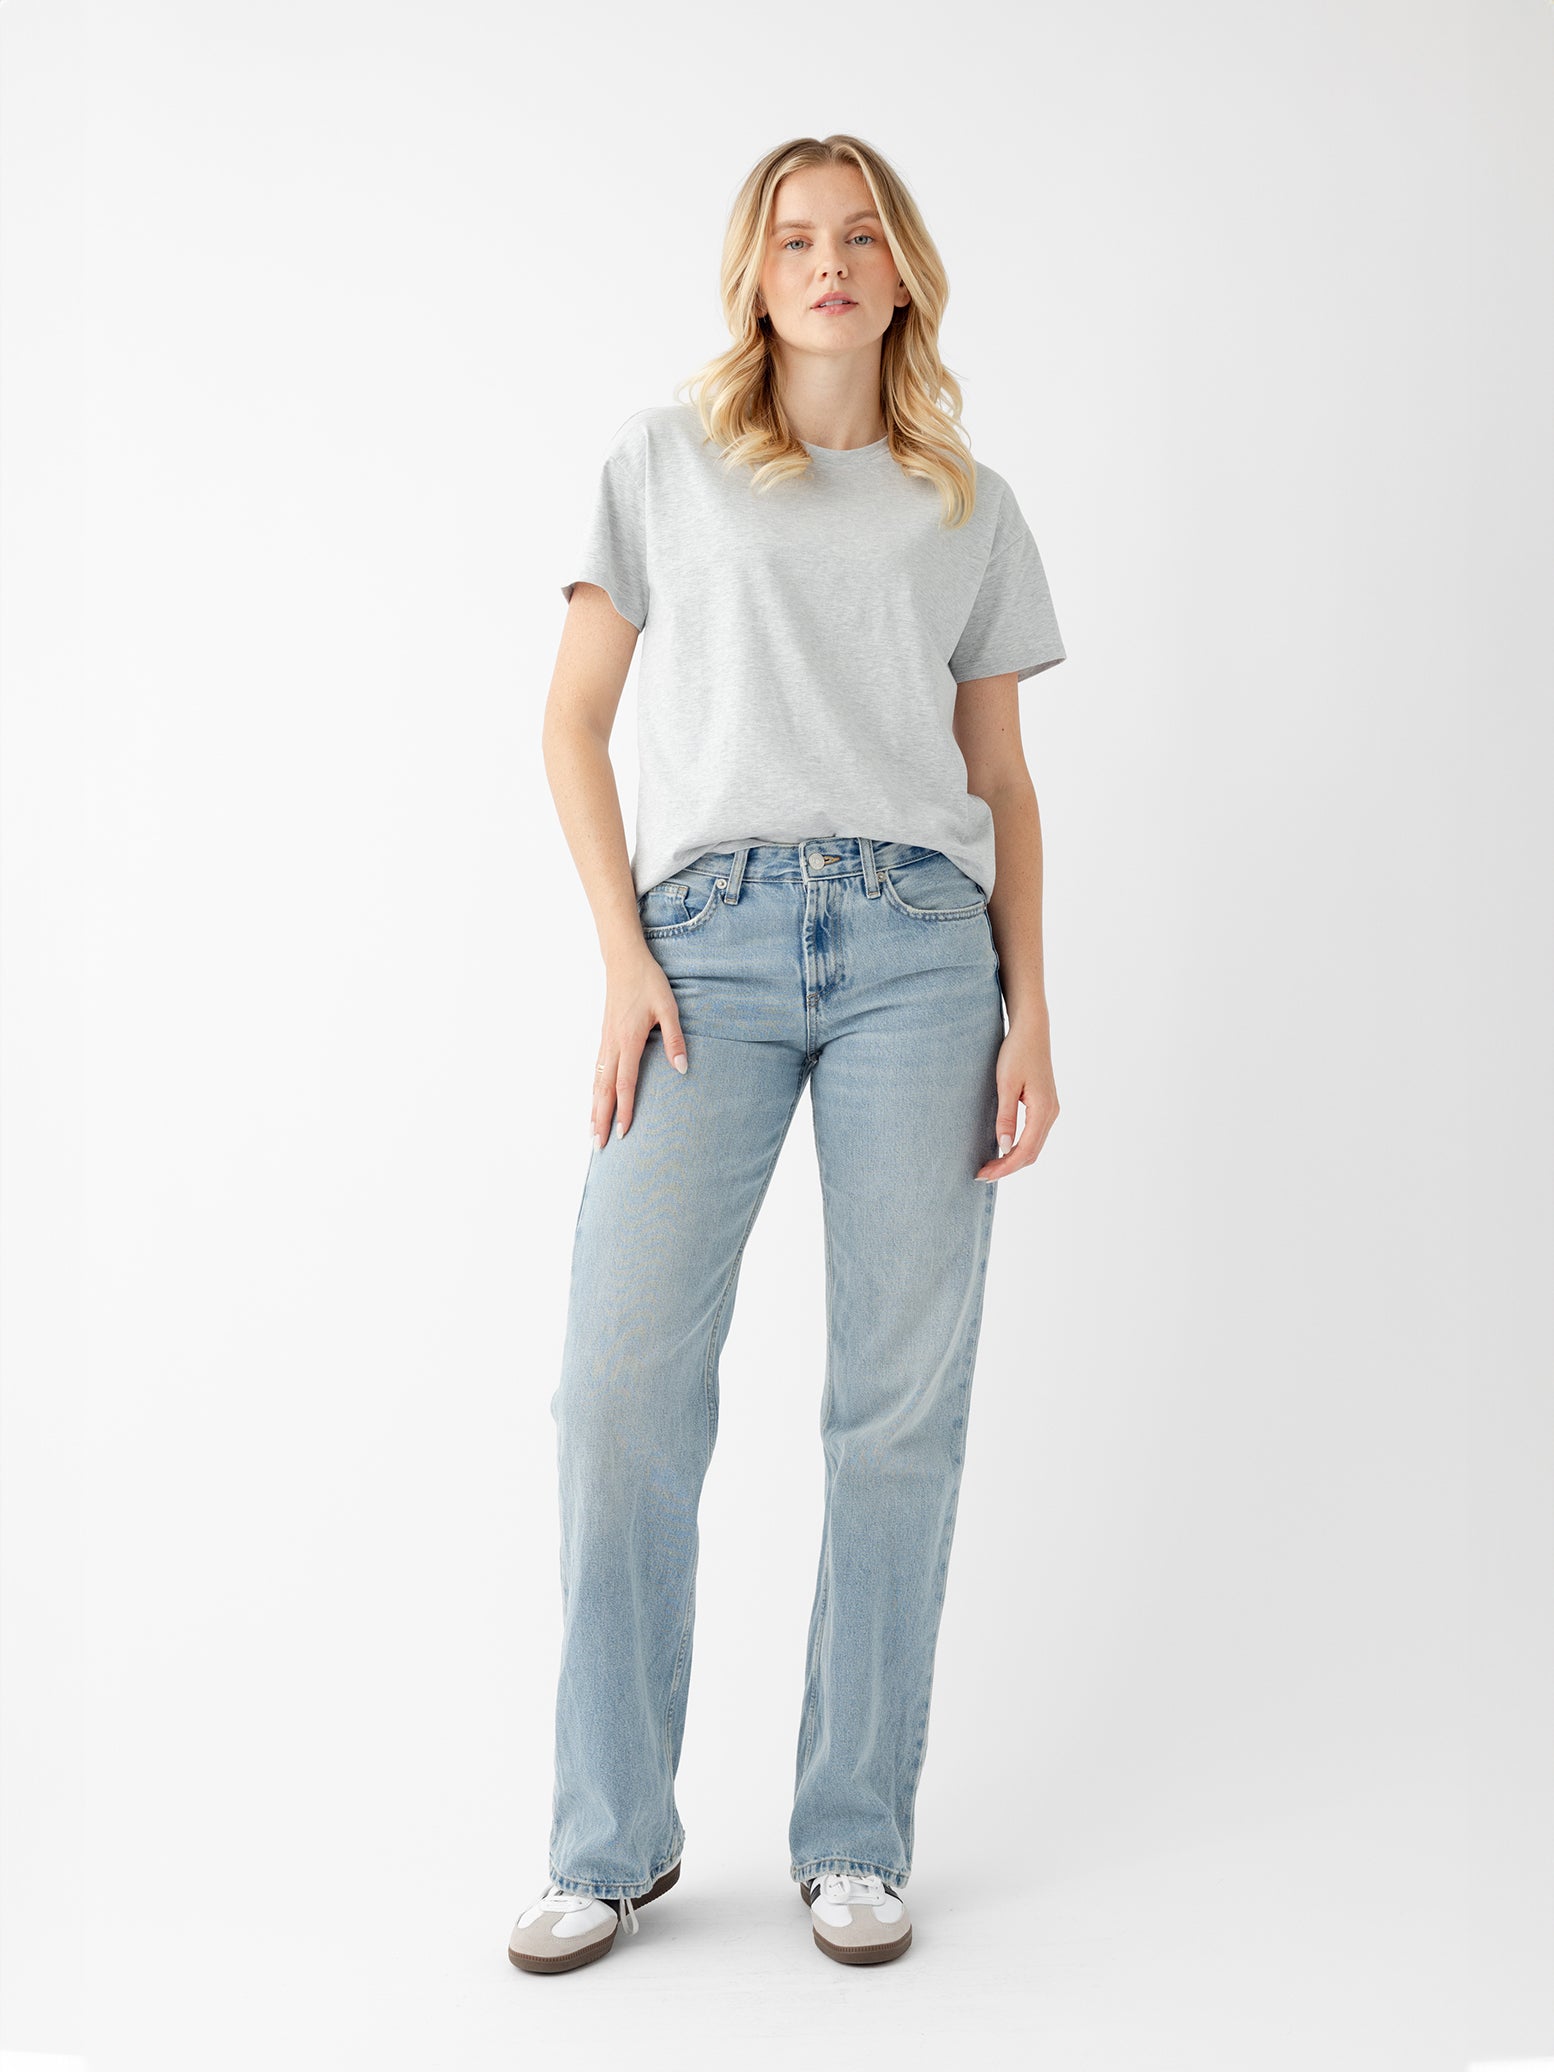 Woman wearing french dove heather tee with jeans 